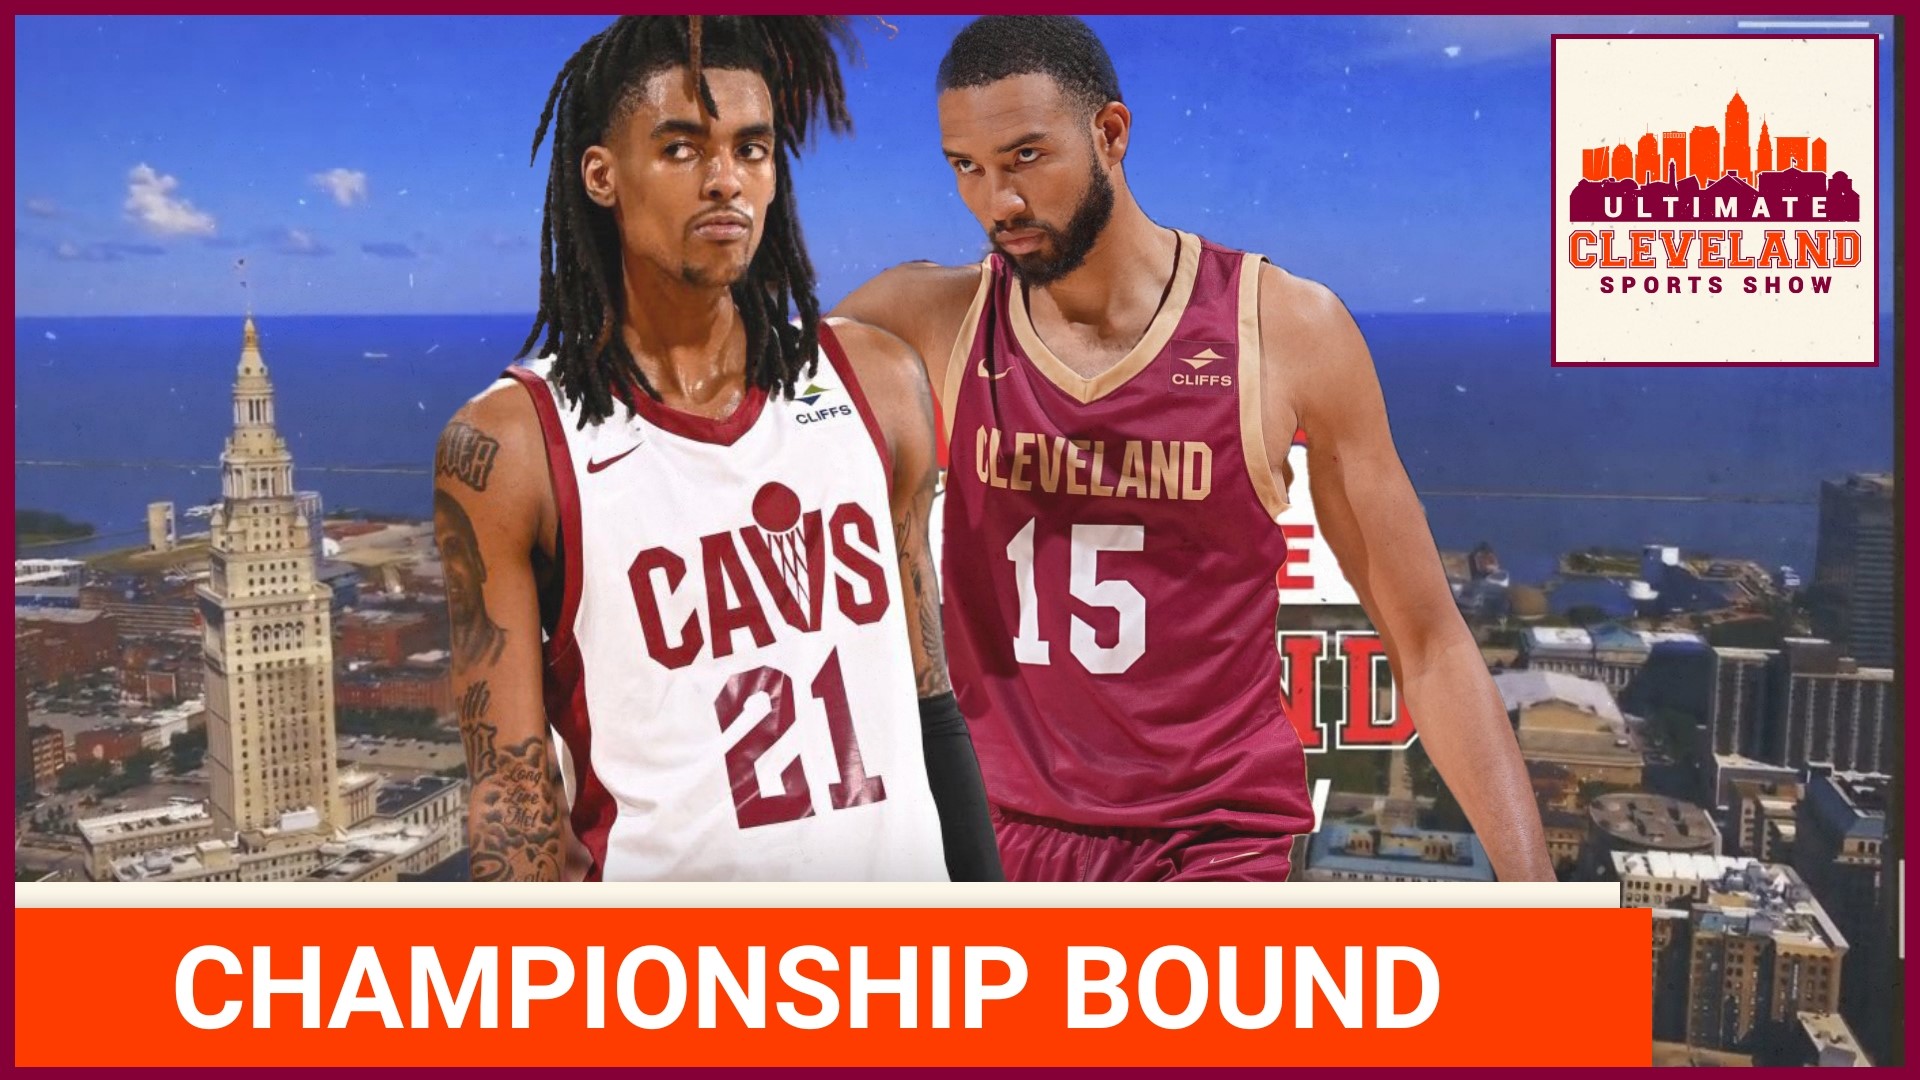 Emoni Bates scored 20, Isaiah Mobley scored 23 - including the game winner - as the Cleveland Cavaliers snuck past the Brooklyn Nets in overtime to advance to the Su